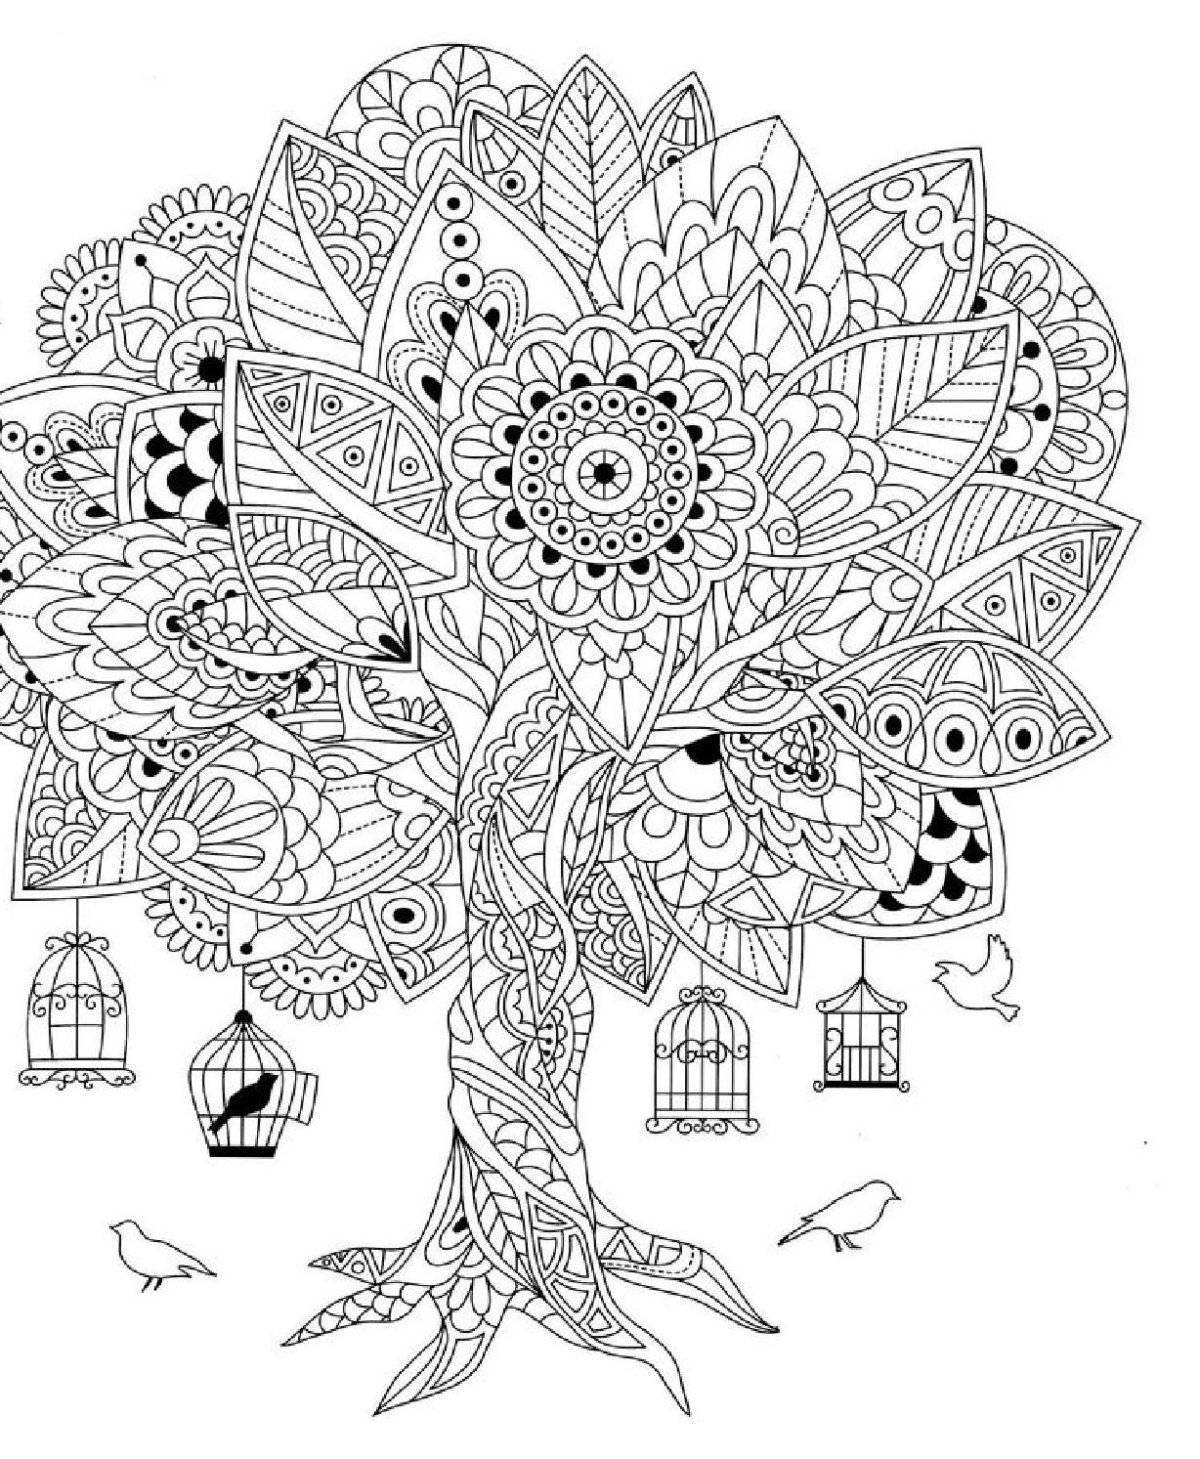 Refreshing coloring book for adults